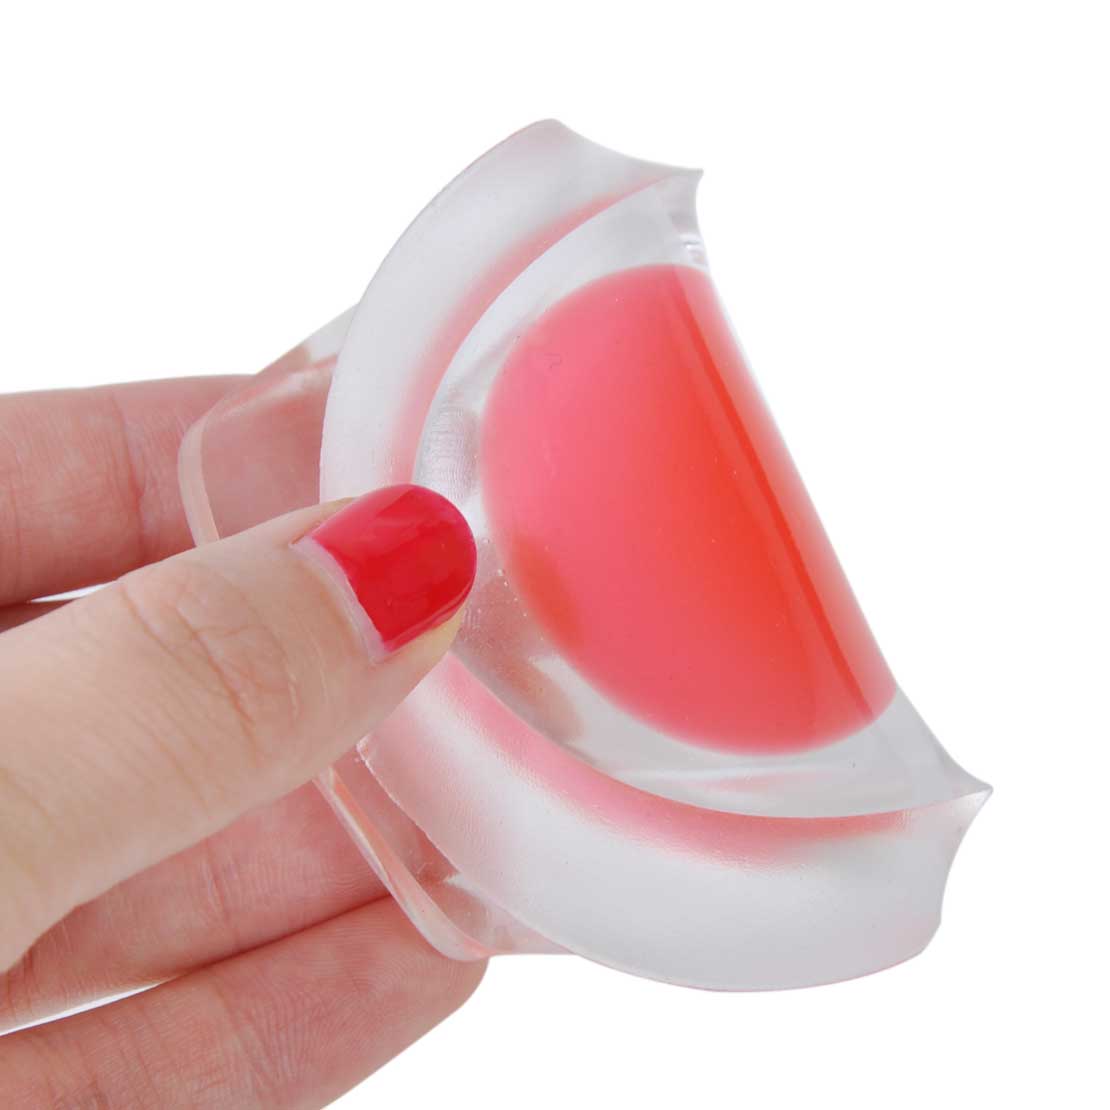 1 Pair Soft Comfort Gel Silicone Heel Cup Insoles Cushion Shoes Pad Foot Care Ebay 